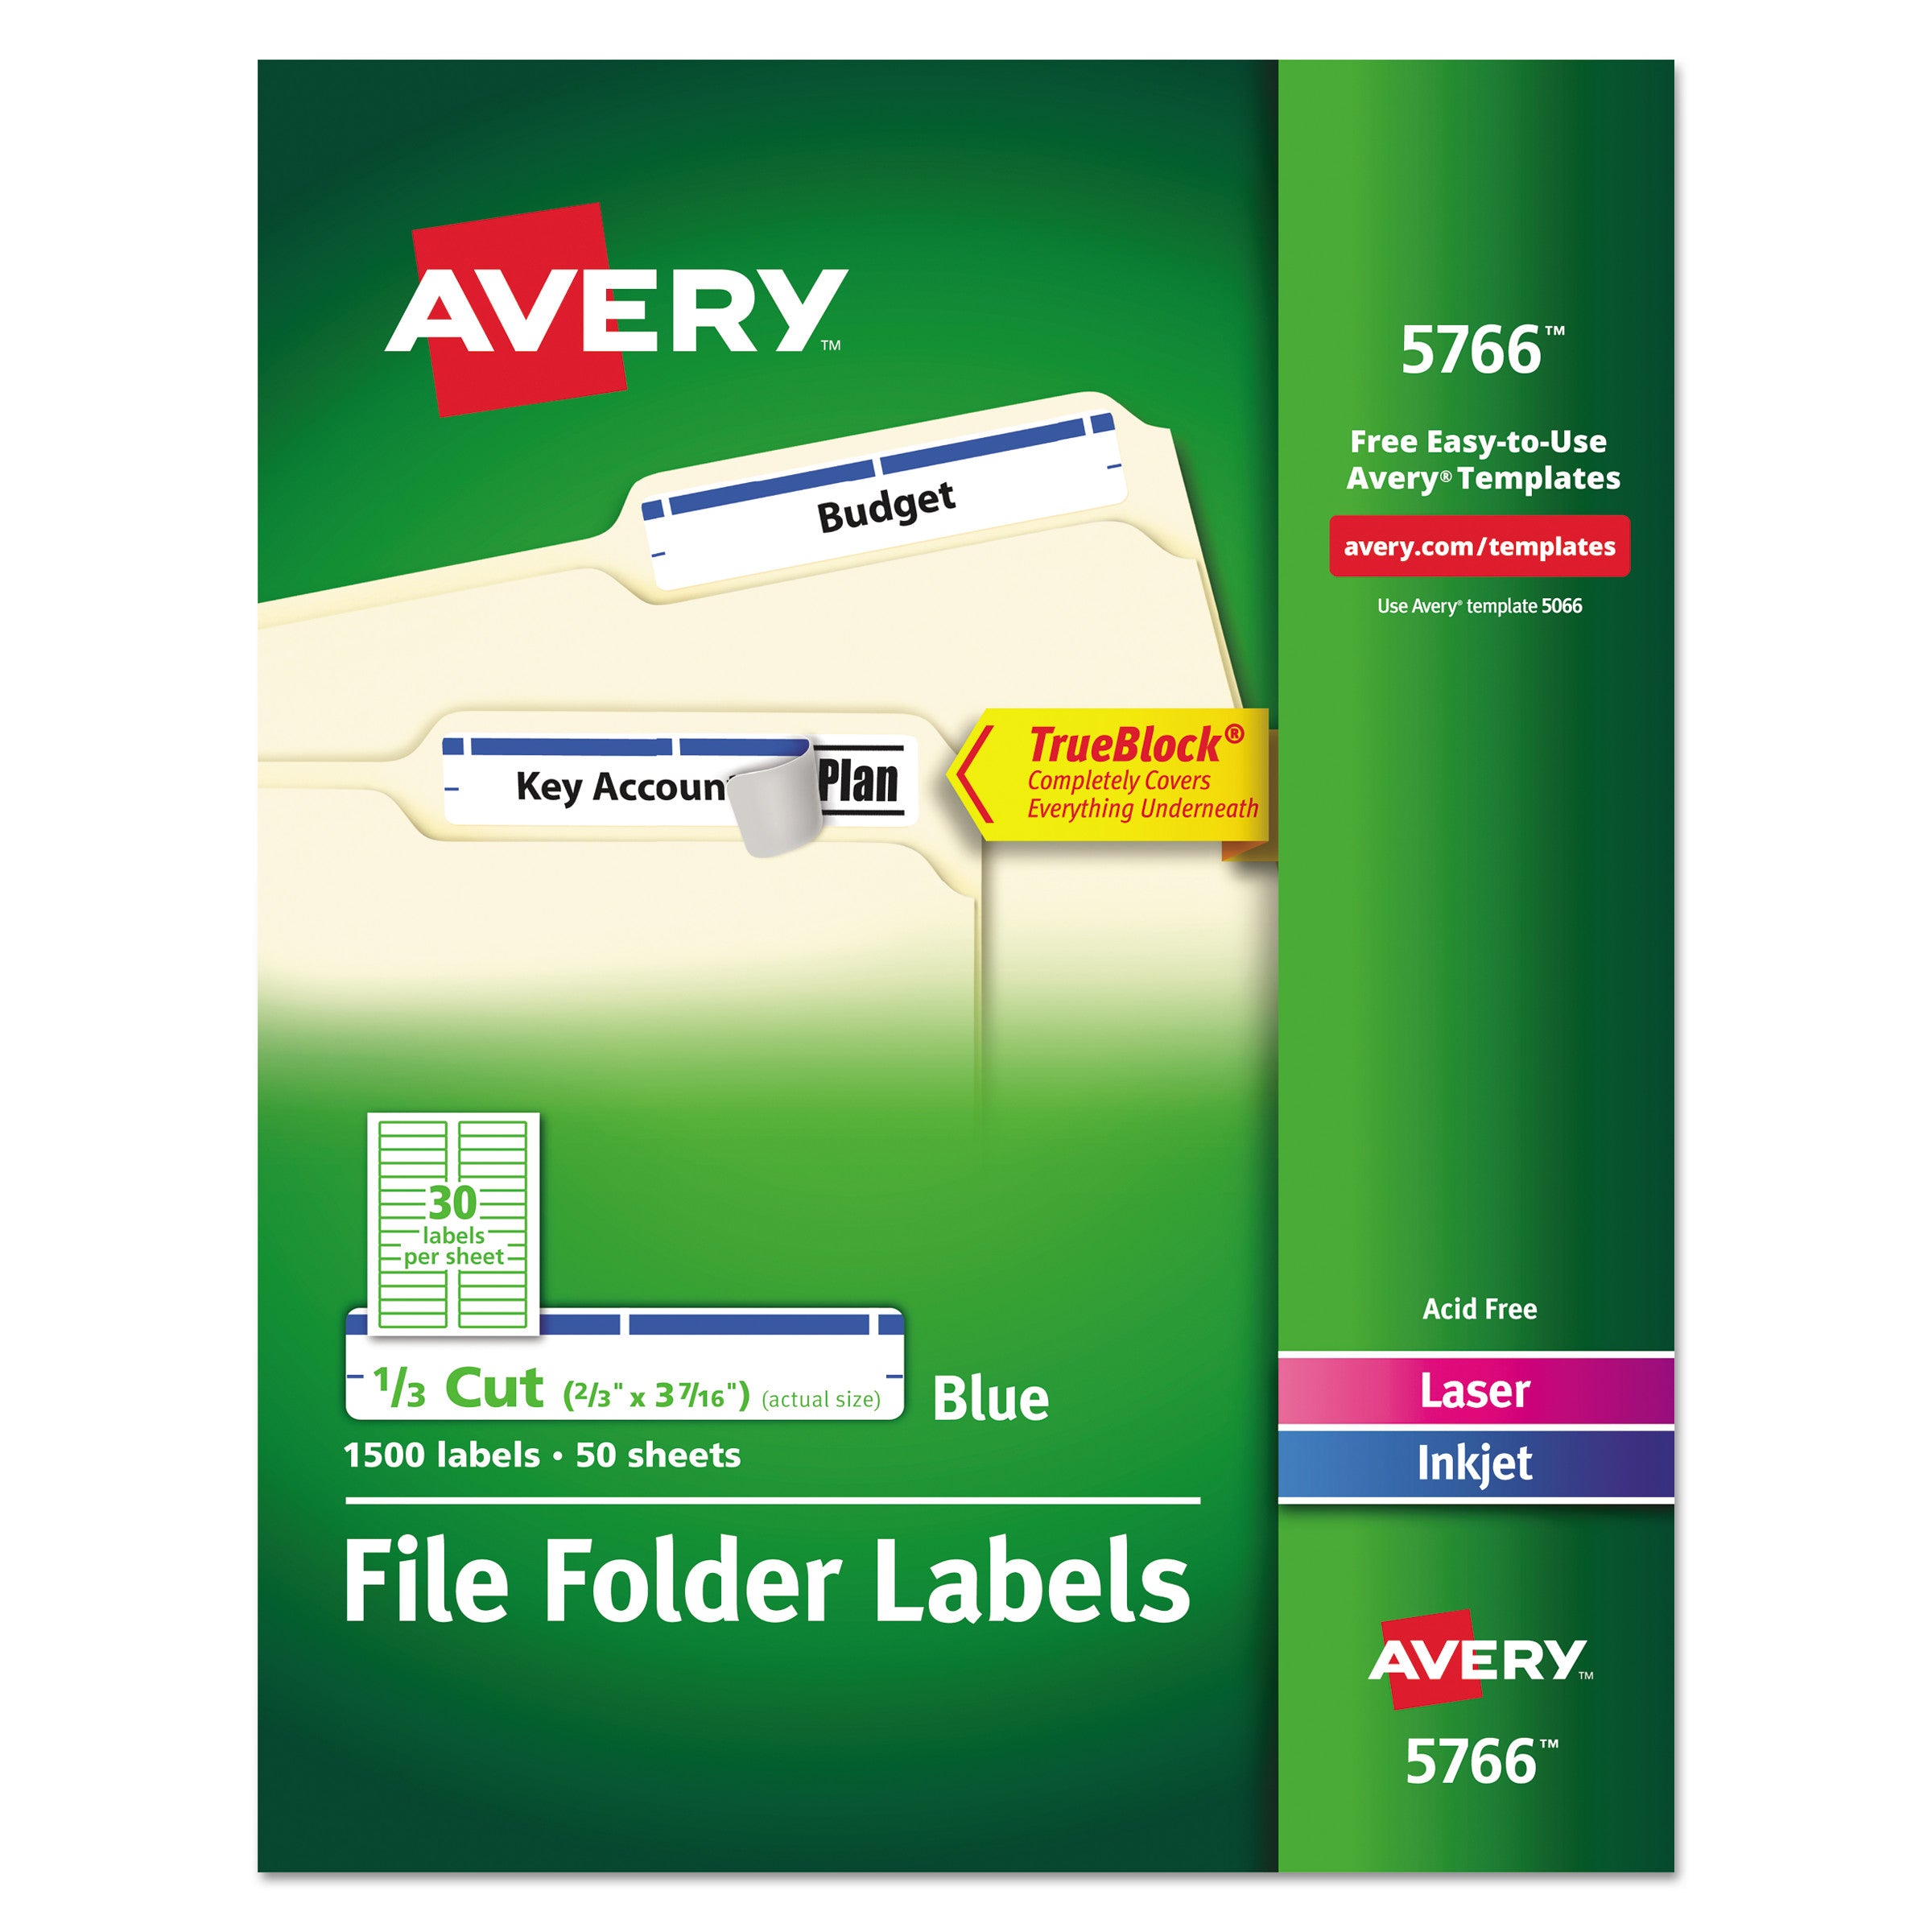 Permanent TrueBlock File Folder Labels with Sure Feed Technology, 0.66 x 3.44, Blue/White, 30/Sheet, 50 Sheets/Box - 